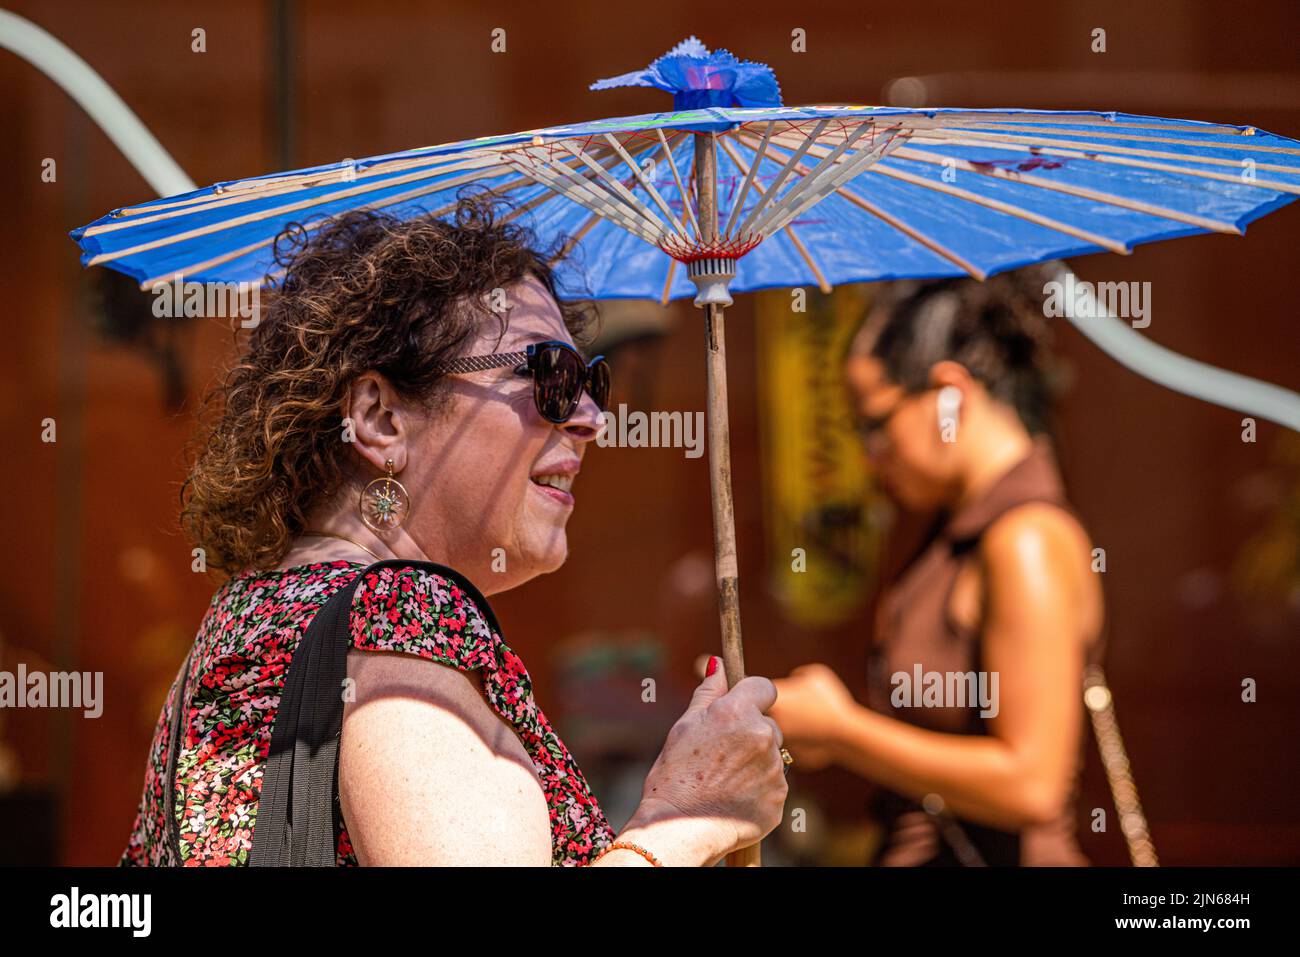 London, UK. 9 August 2022  A woman holds a parasol  to protect from the heat  in Oxford Street. The UK  health security agency has issued a warning as England is placed on a level 3 health alert  temperatures are expected to soar to mid 30's celsius for the next week.   Credit. amer ghazzal/Alamy Live News Stock Photo